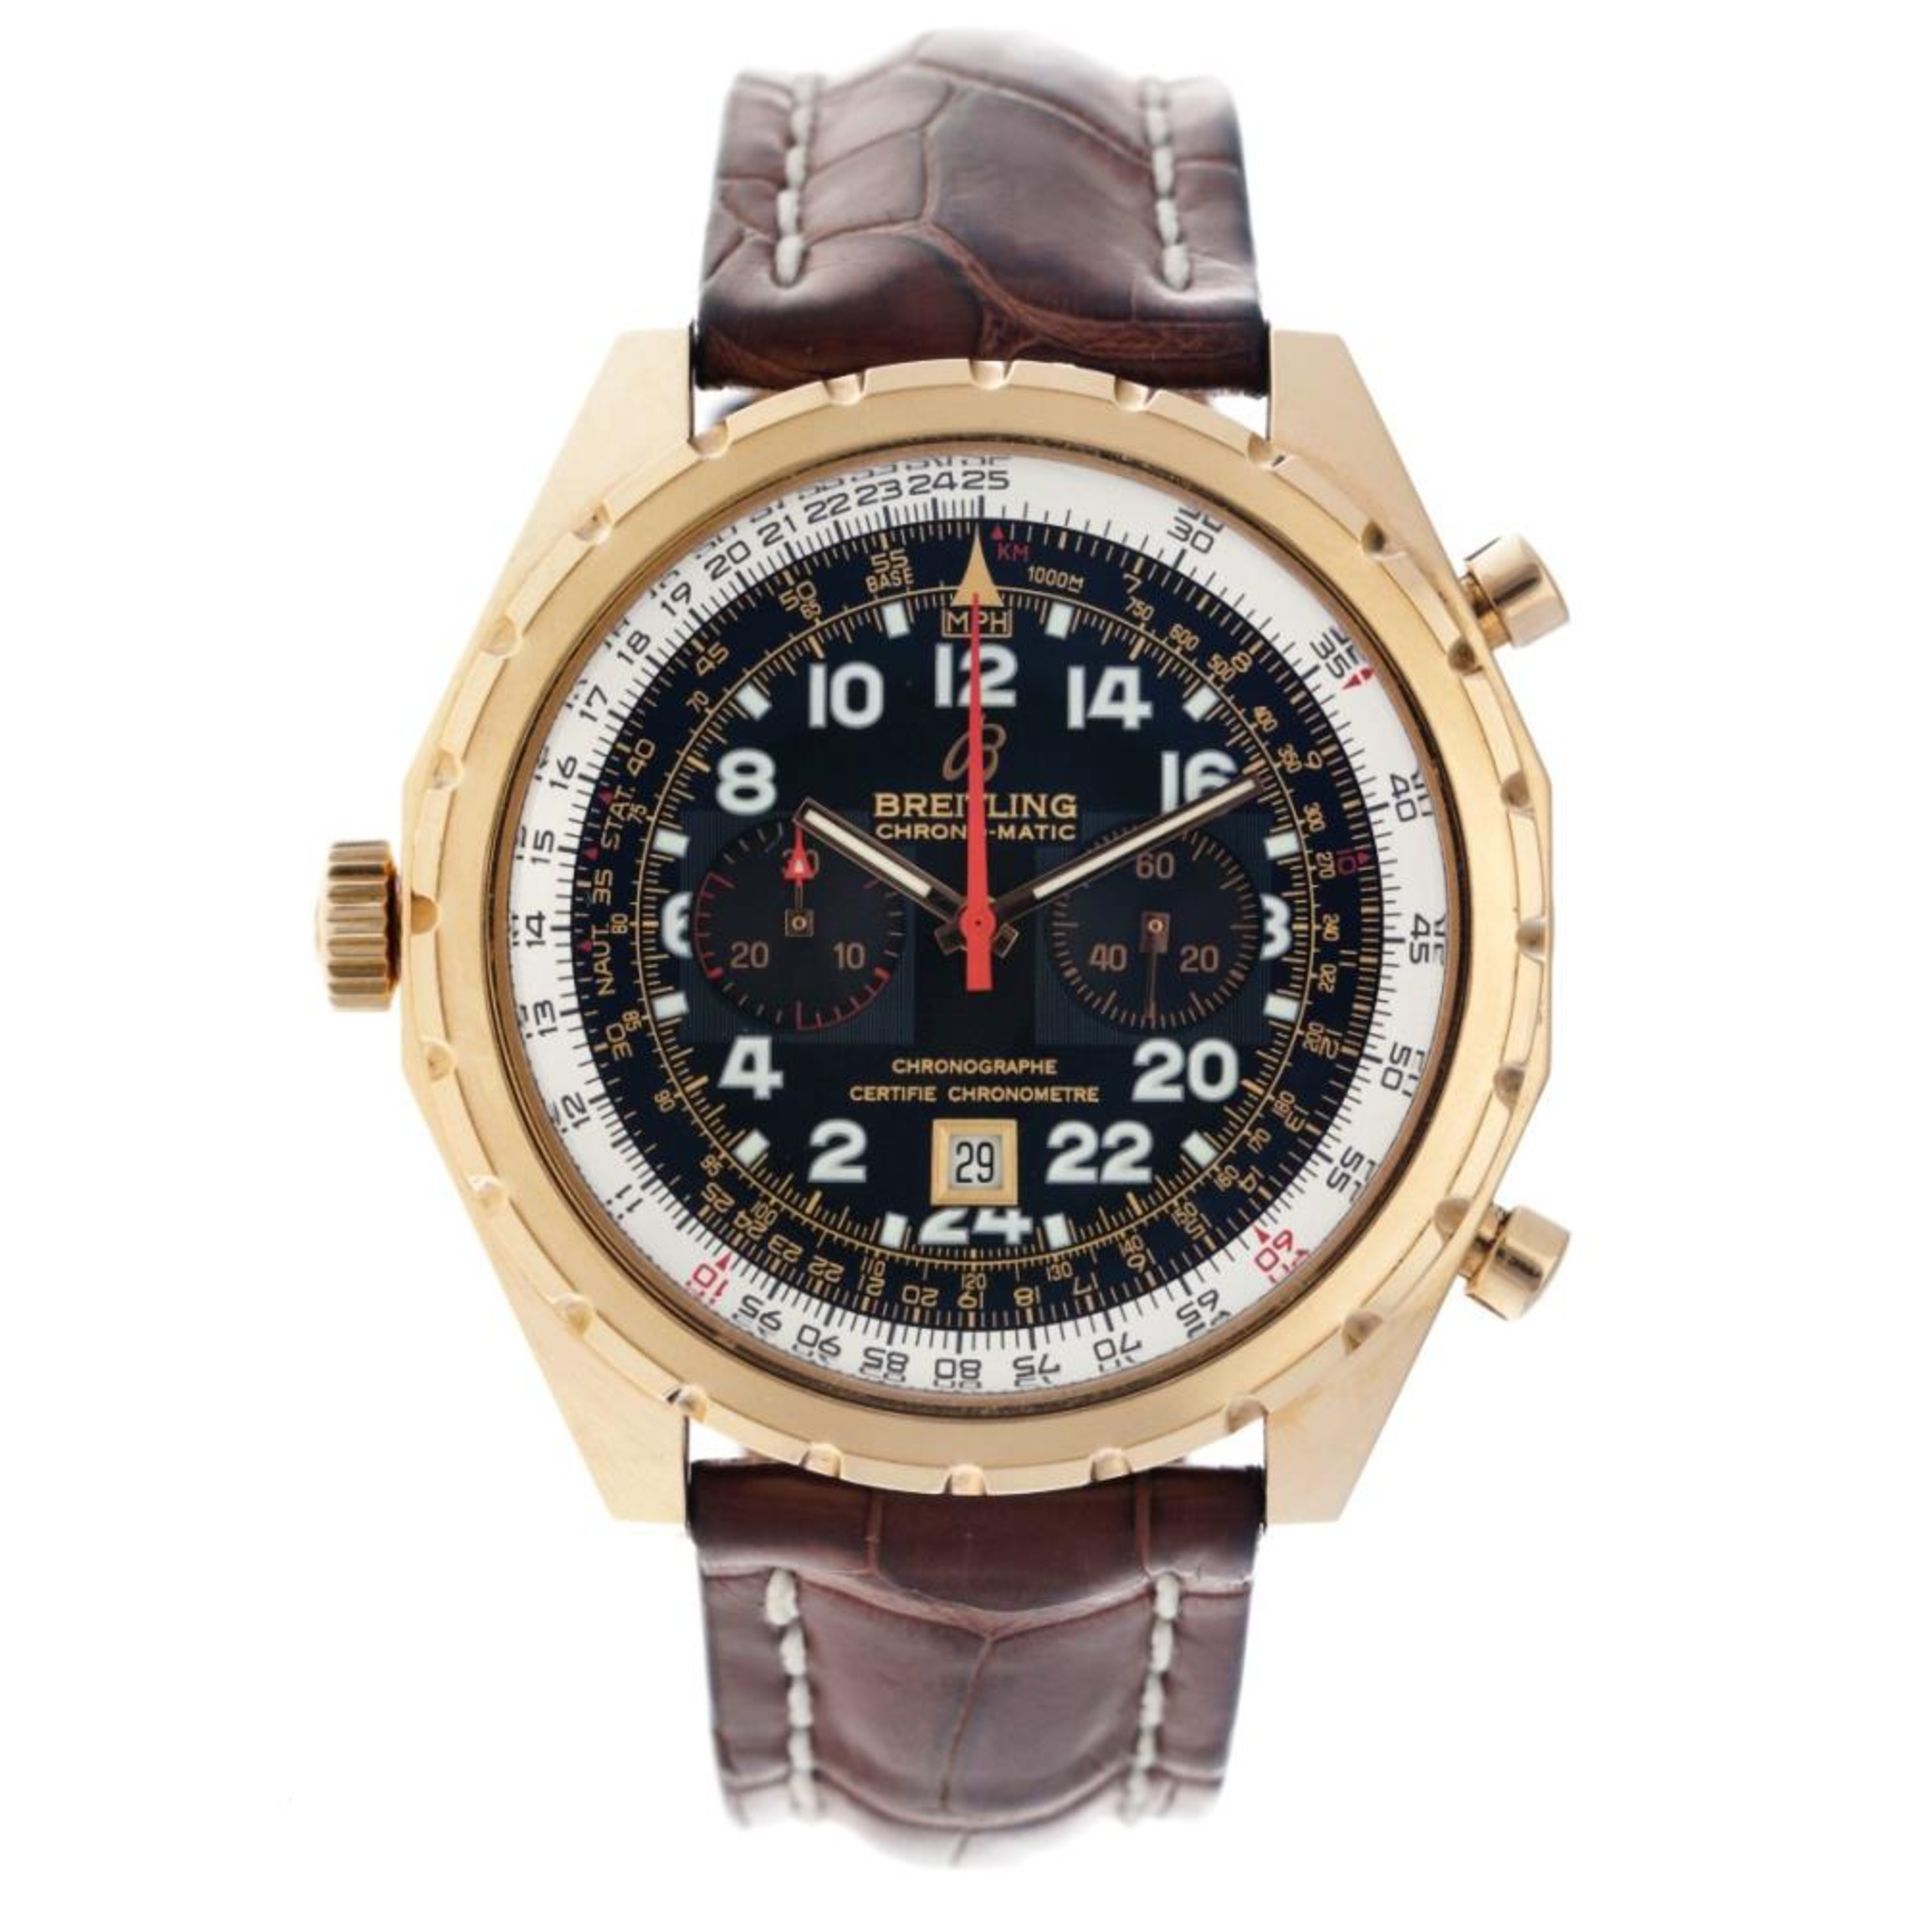 Breitling Chrono-Matic H22360 - Men's watch - 2006. - Image 2 of 12